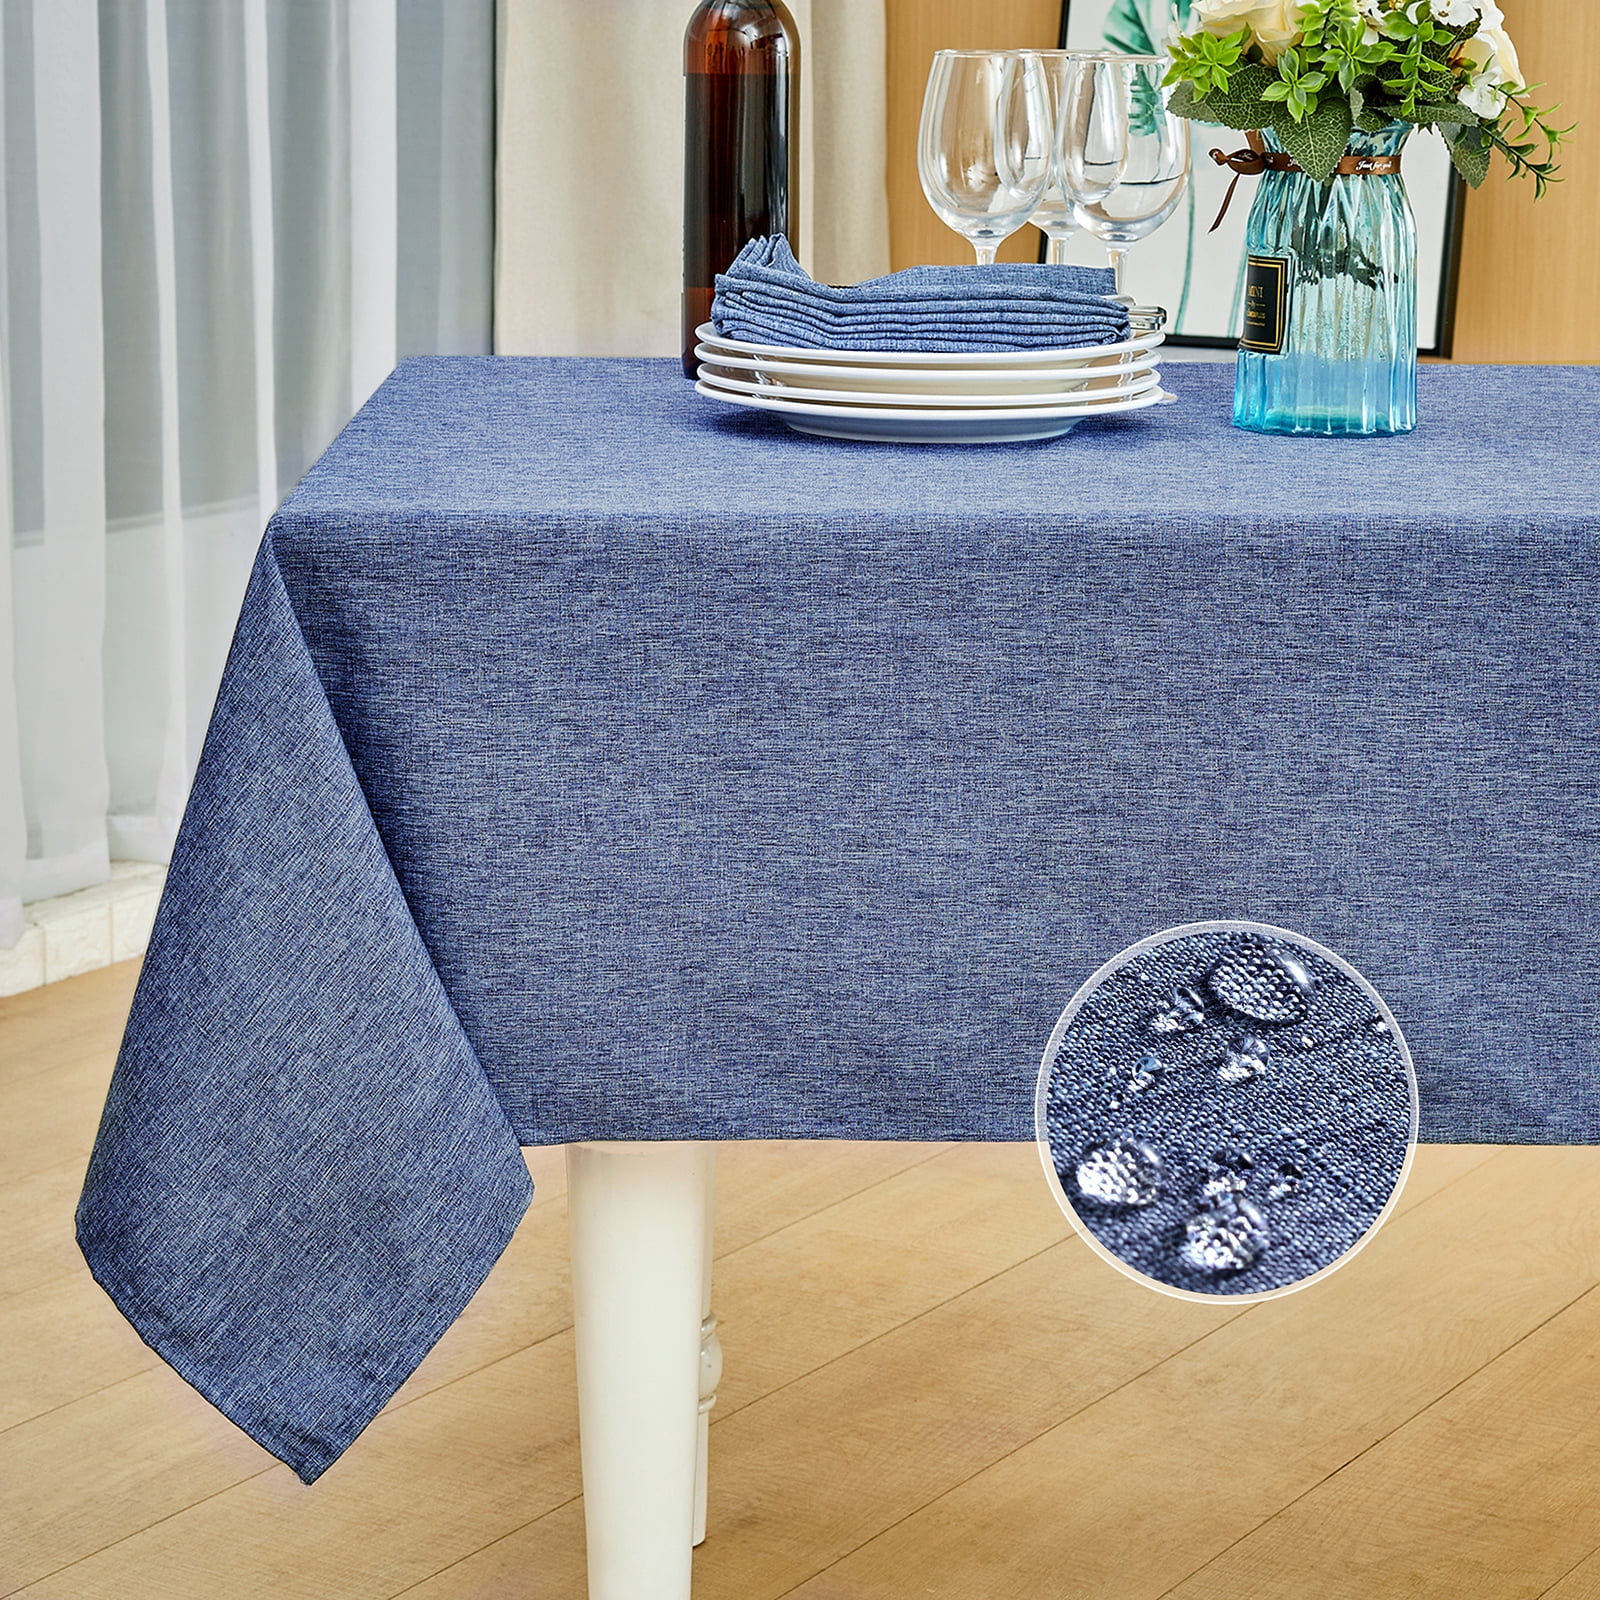 Shop Generic 30*40cm Cotton Linen Heat Insulation Waterproof Table Dining  Meal Cup Mat Mouse whale Online